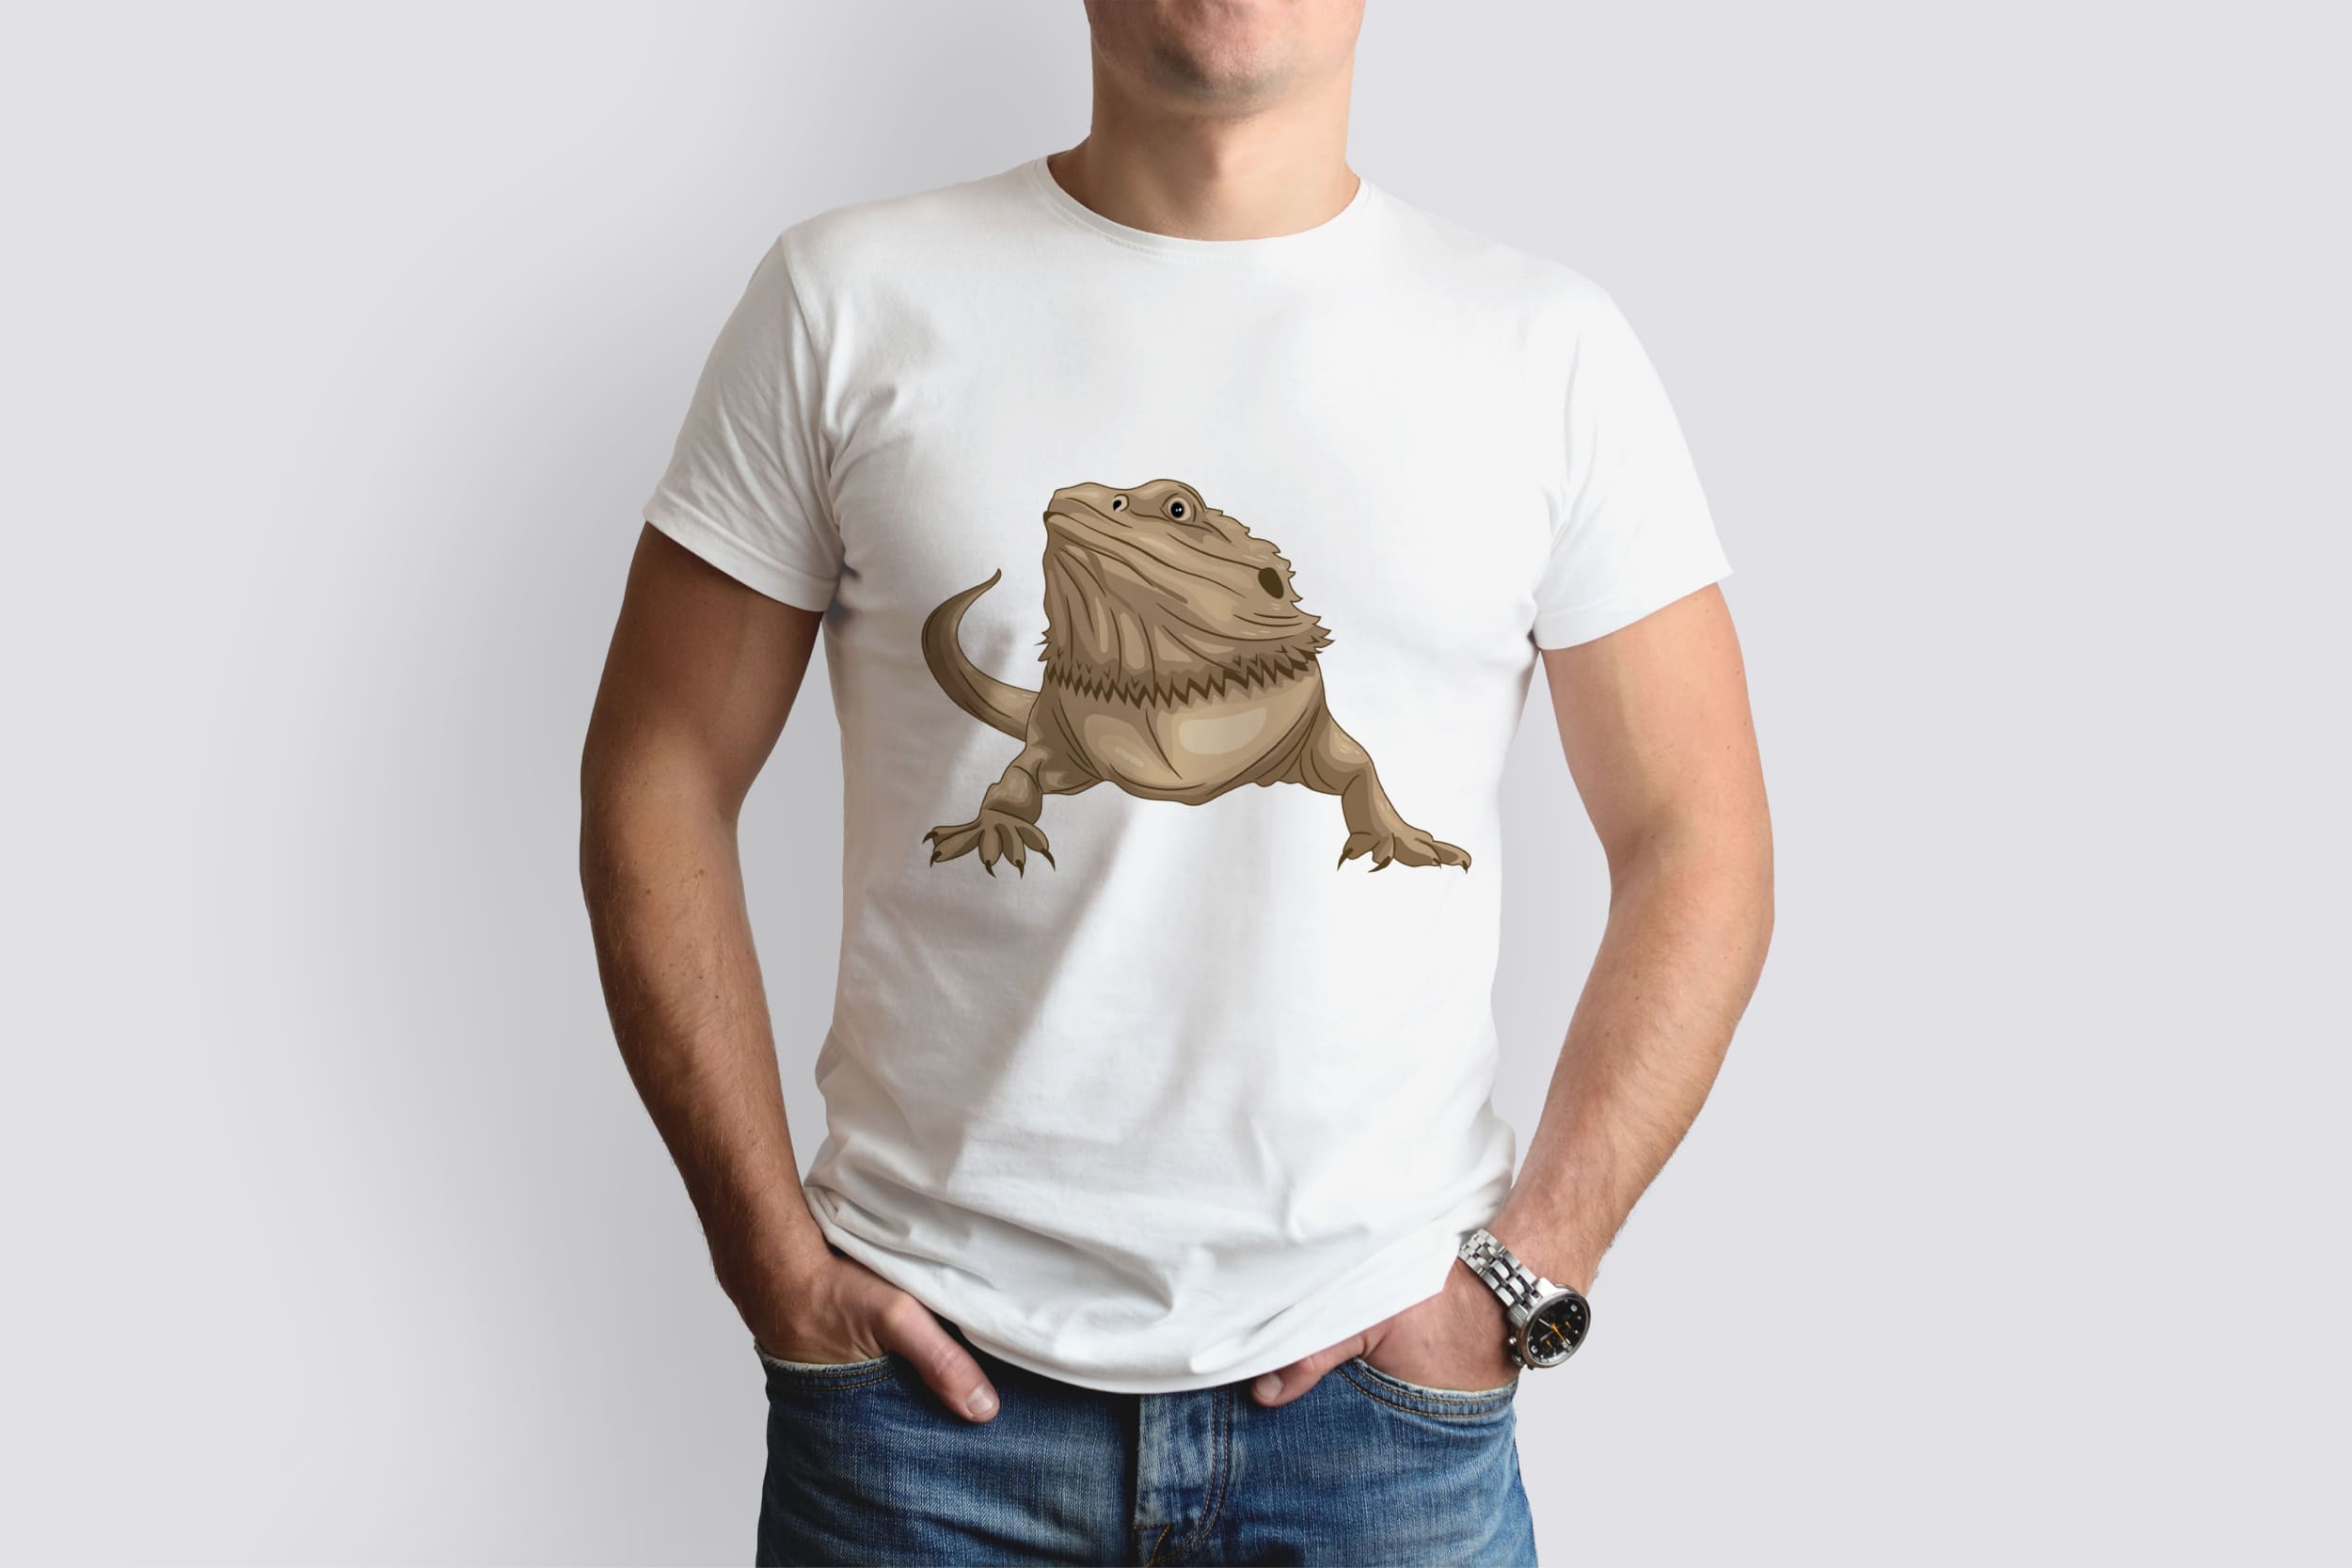 A white t-shirt on a man with an image of a brown bearded dragon.